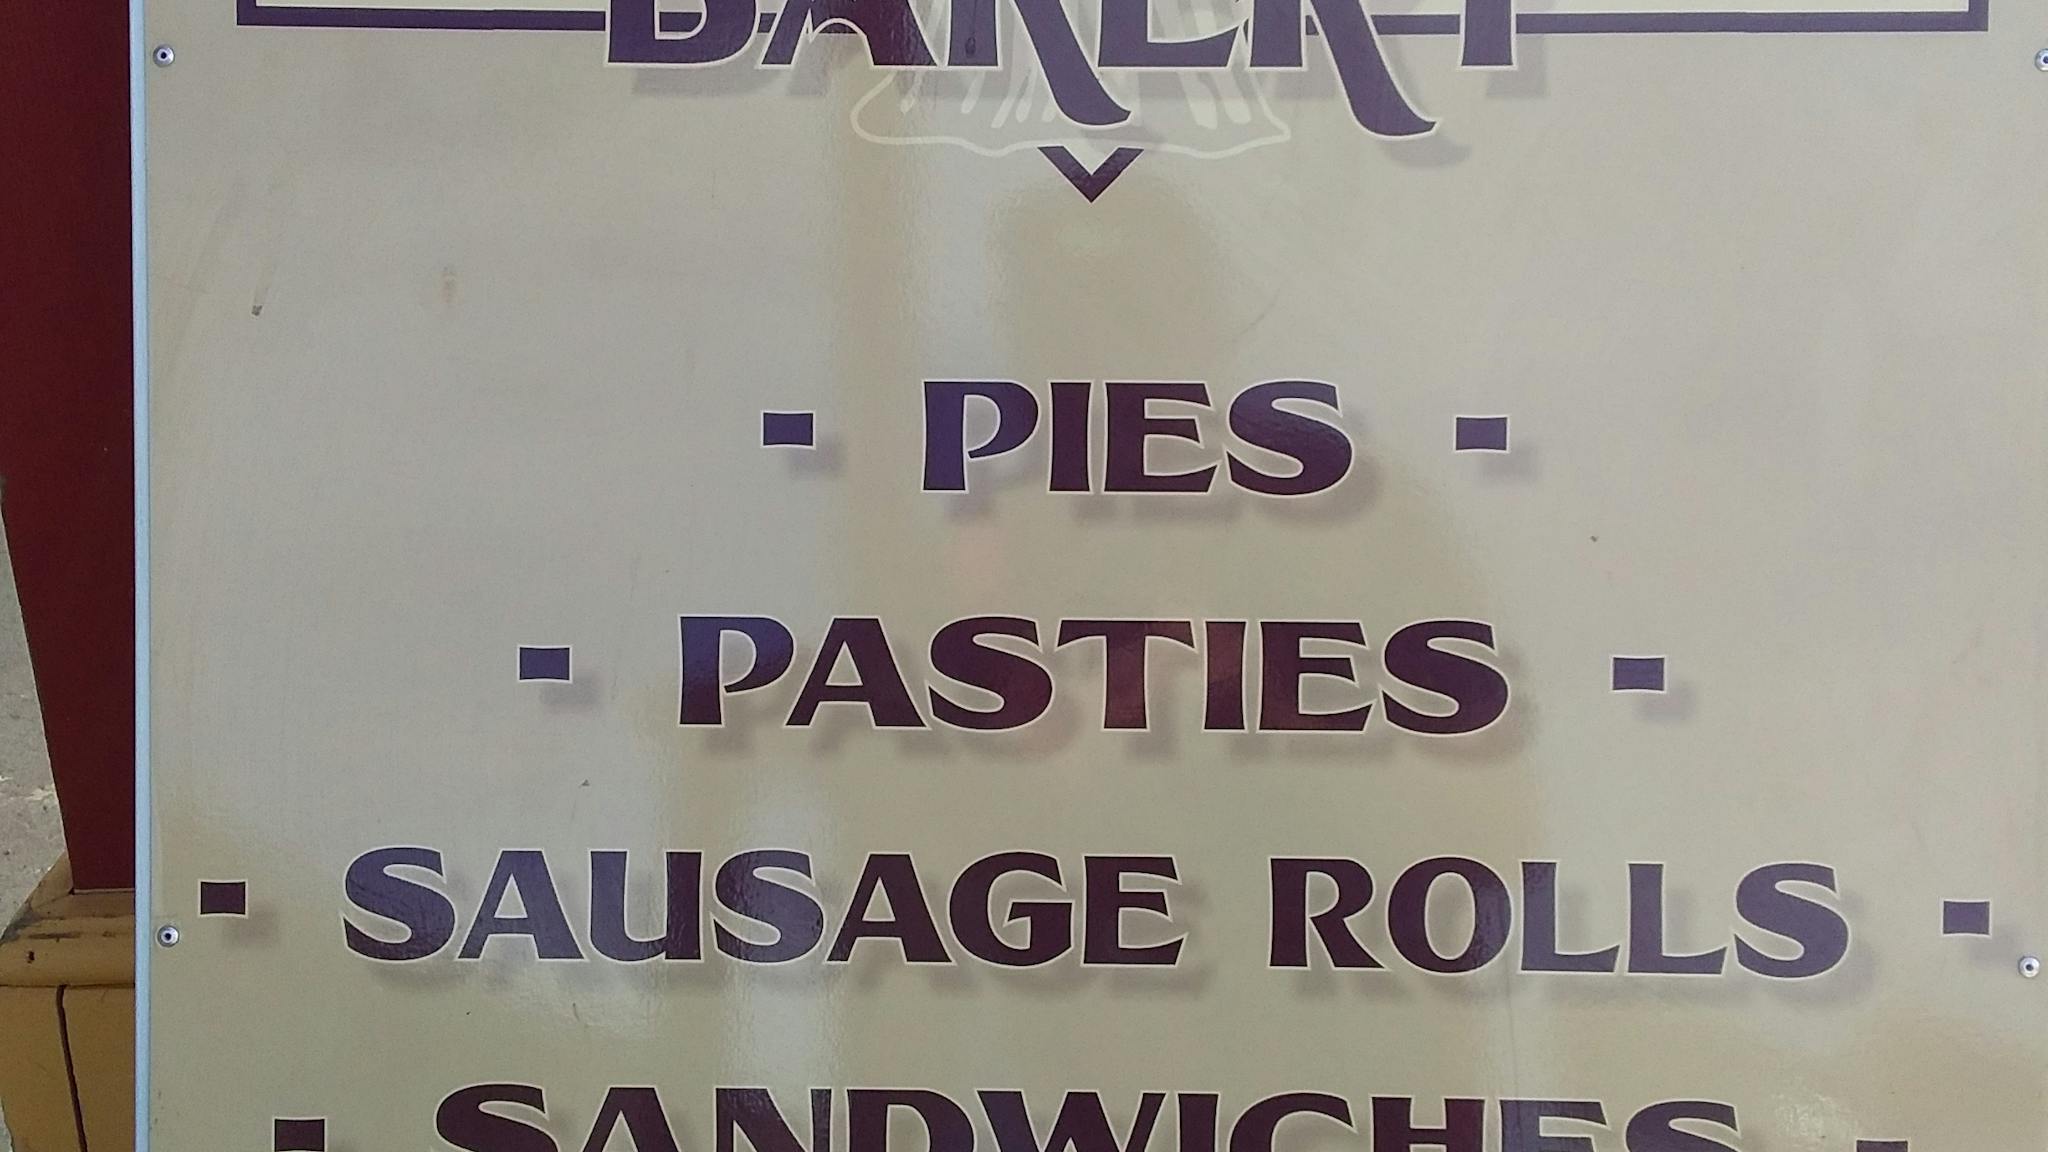 BAKERY SIGN